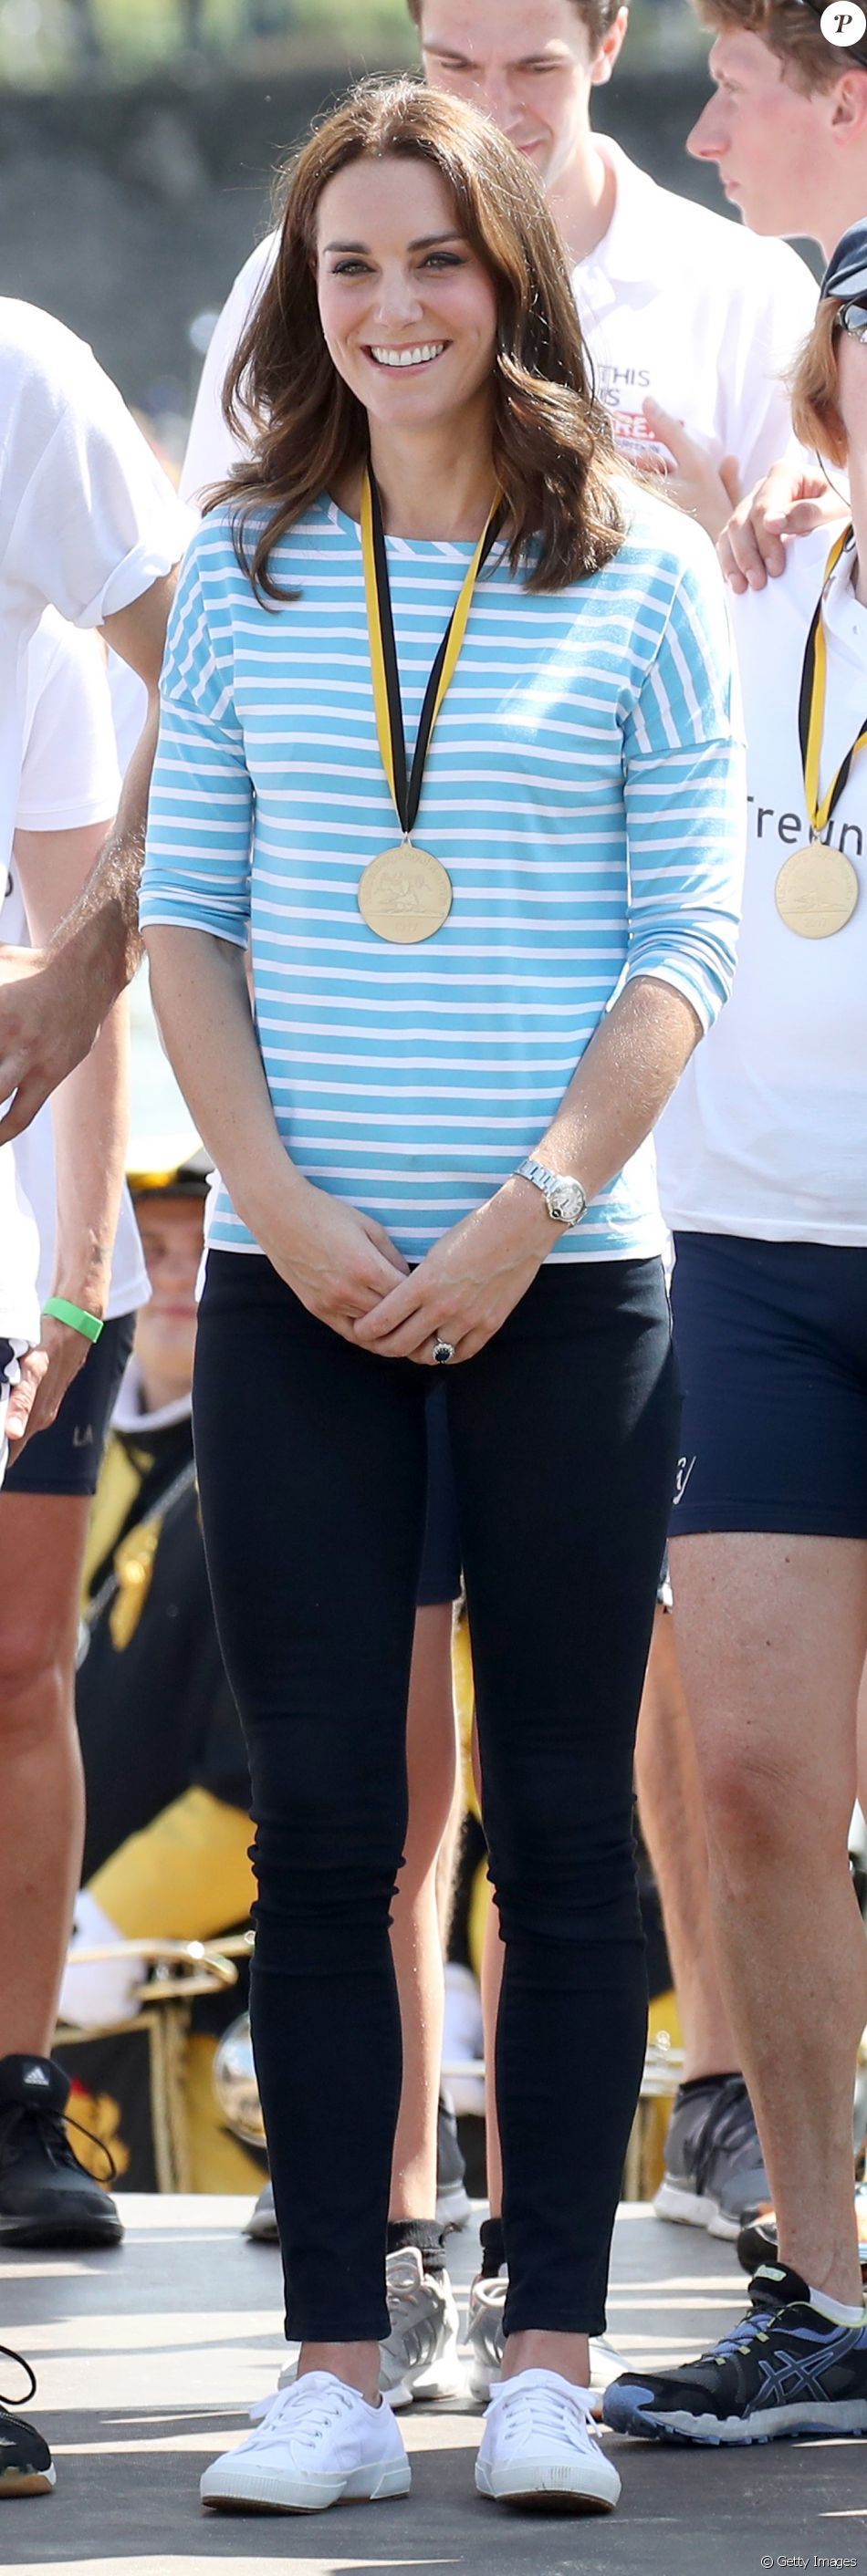 Kate Middleton's Lululemon Chargefeel Sports Shoes in White